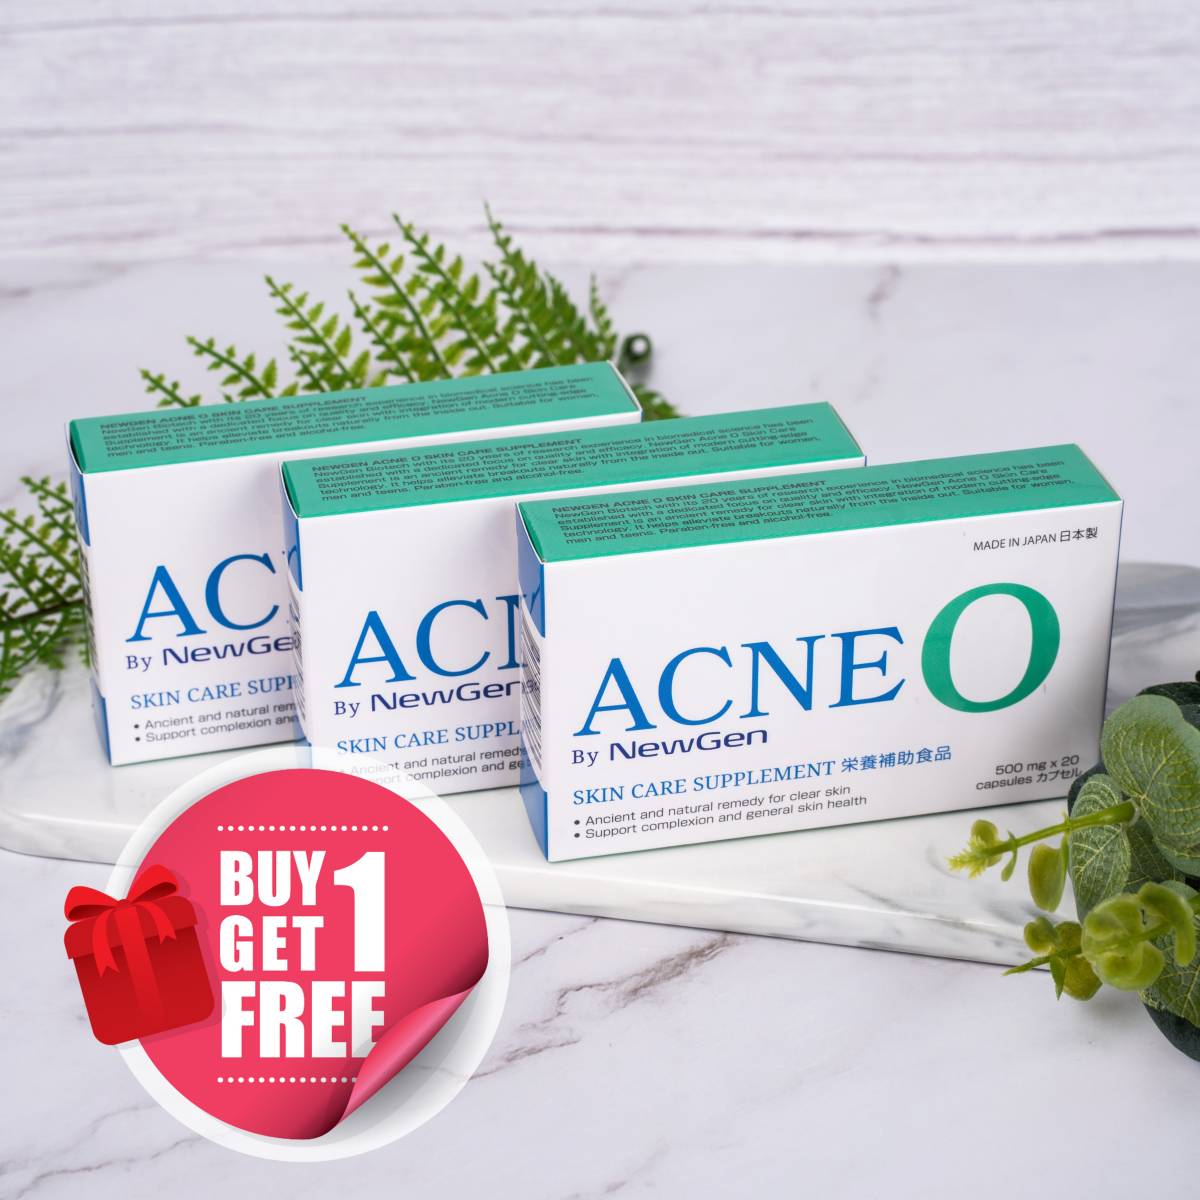 ACNE O Skin Care Supplement (Bundle of 3)